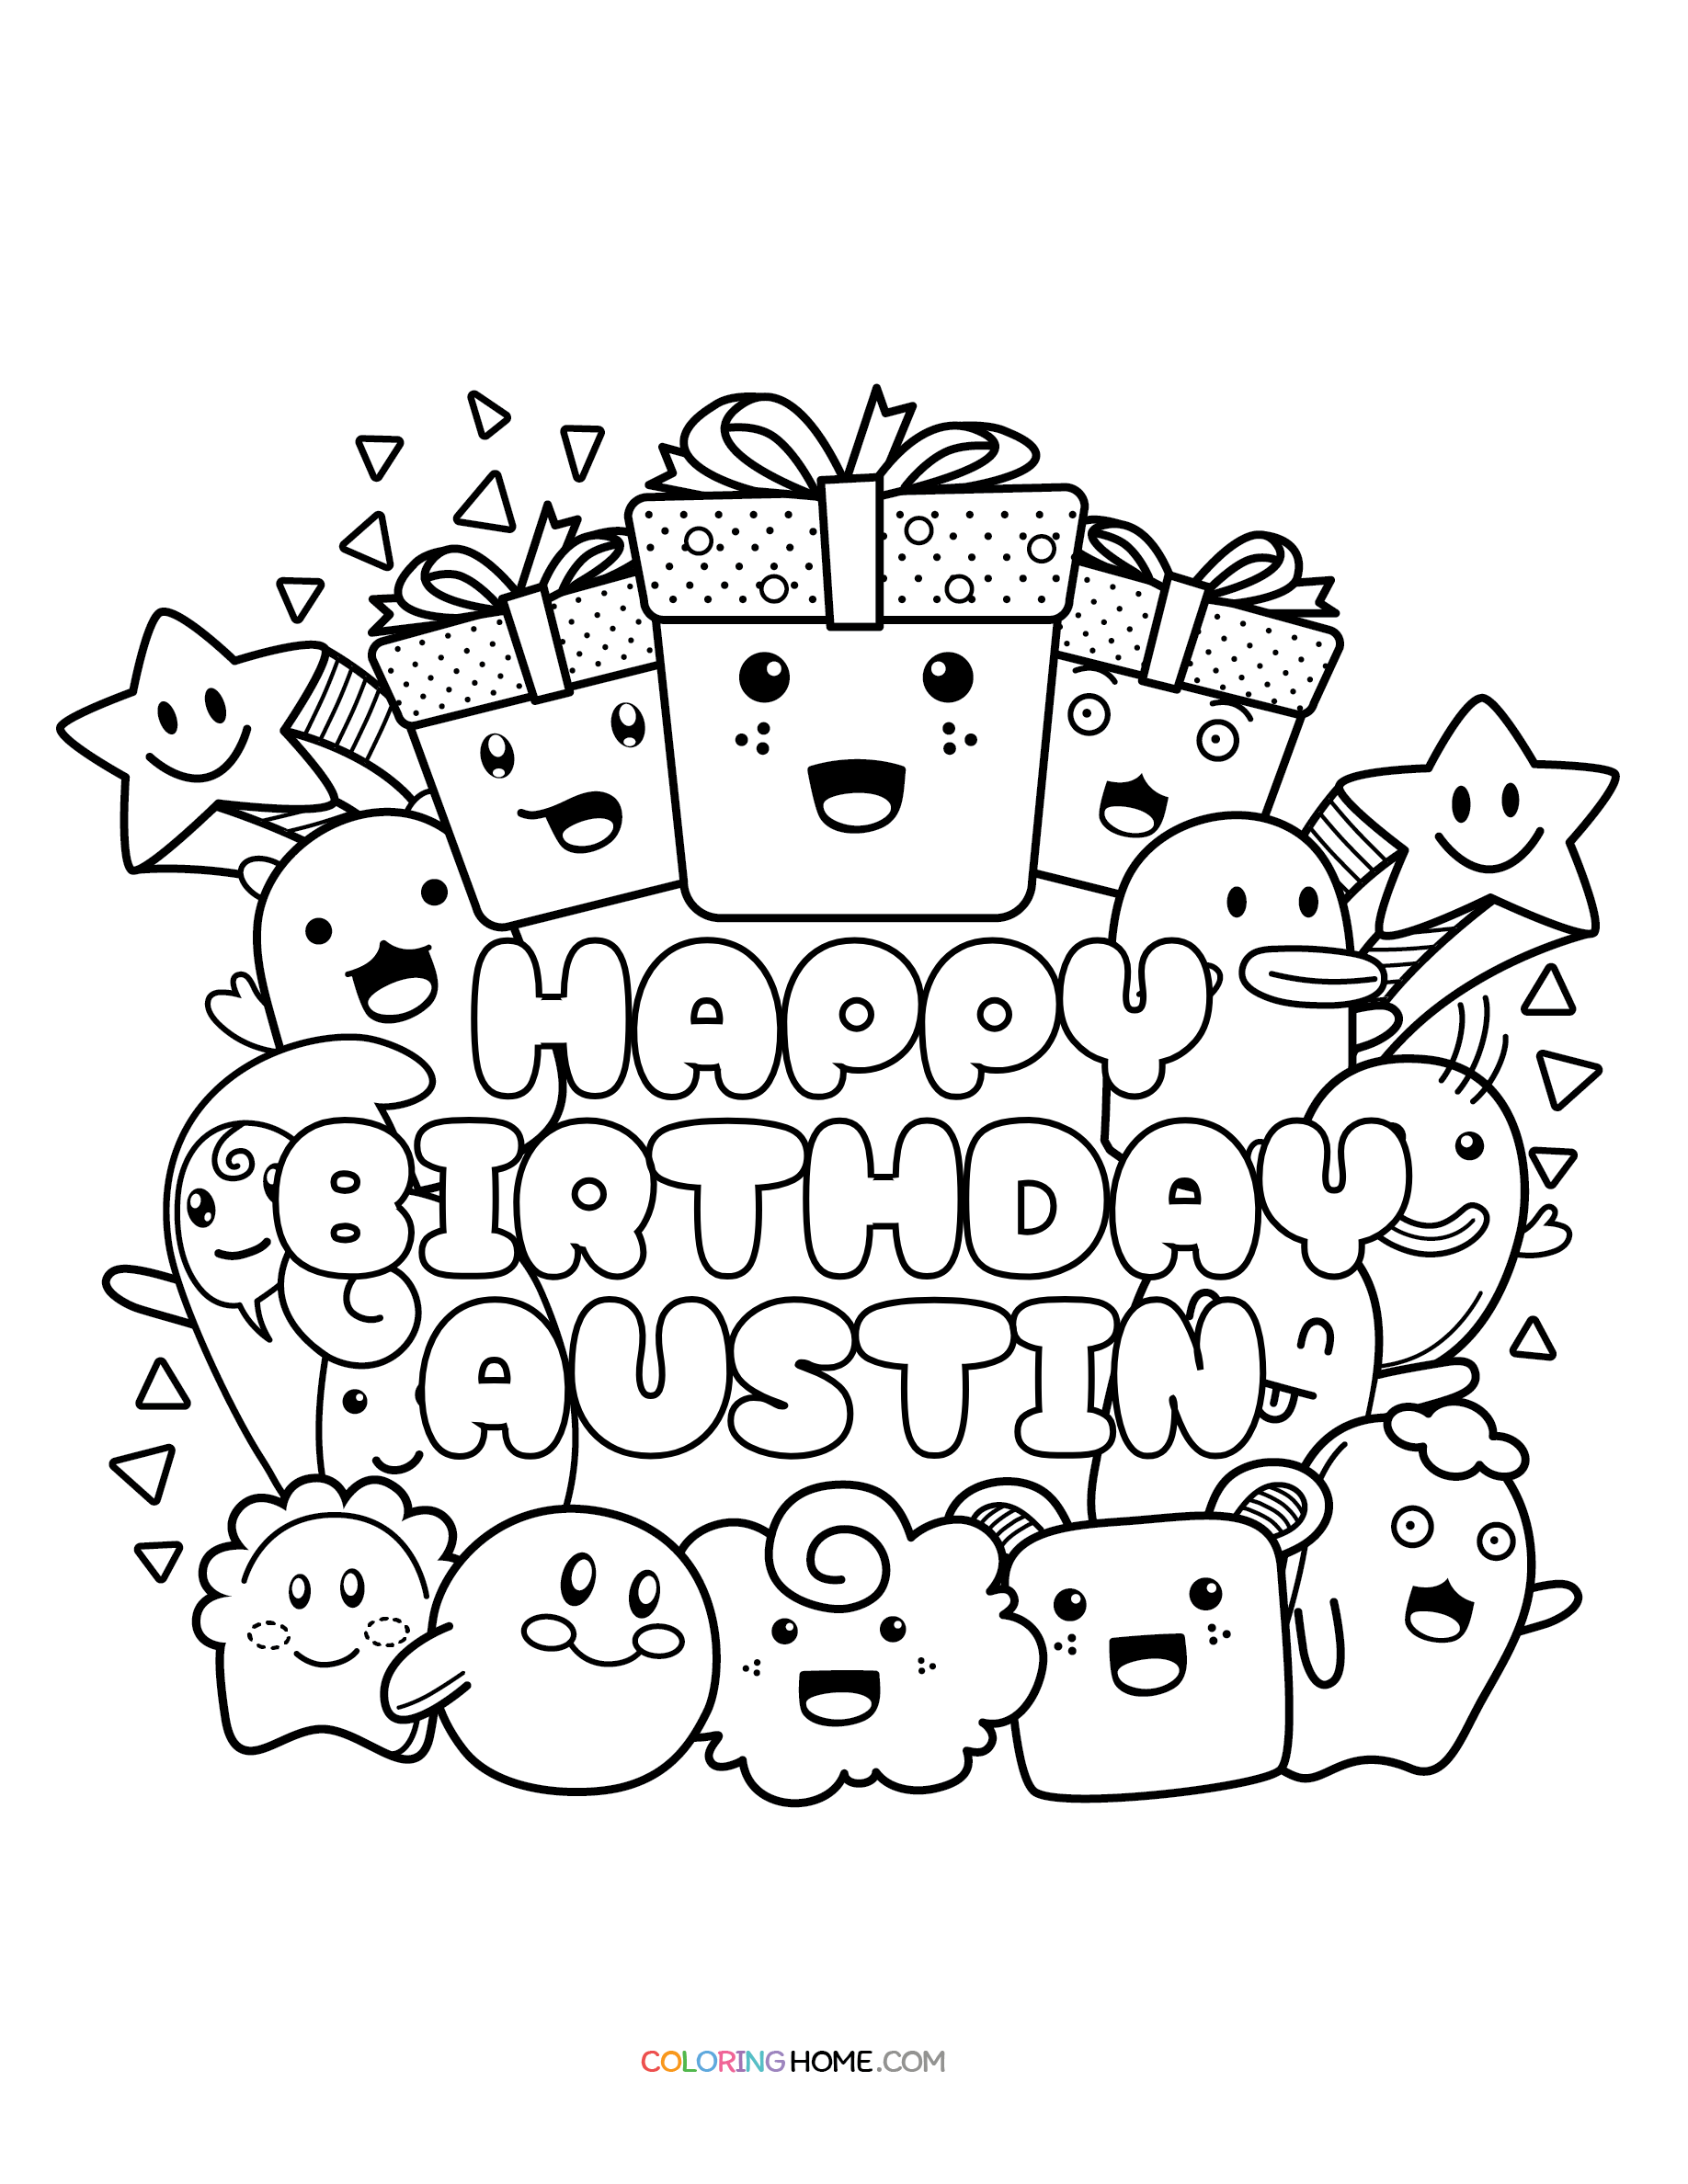 Happy Birthday Austin coloring page